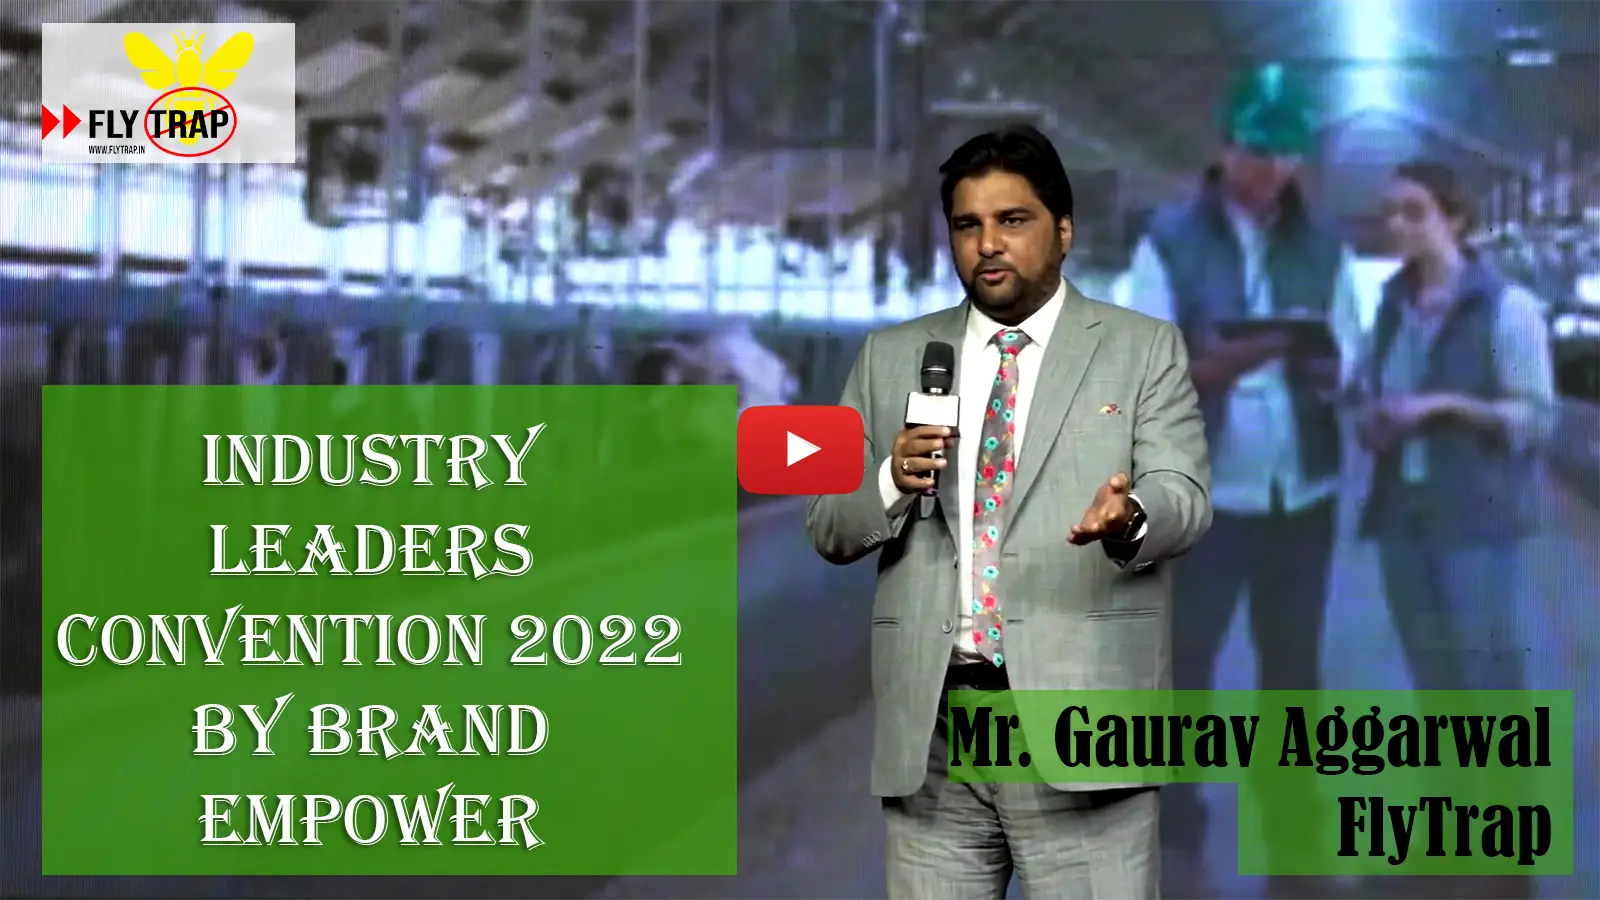 Mr. Gaurav Aggarwal in Industry Leaders Convention 2022 for FlyTrap India